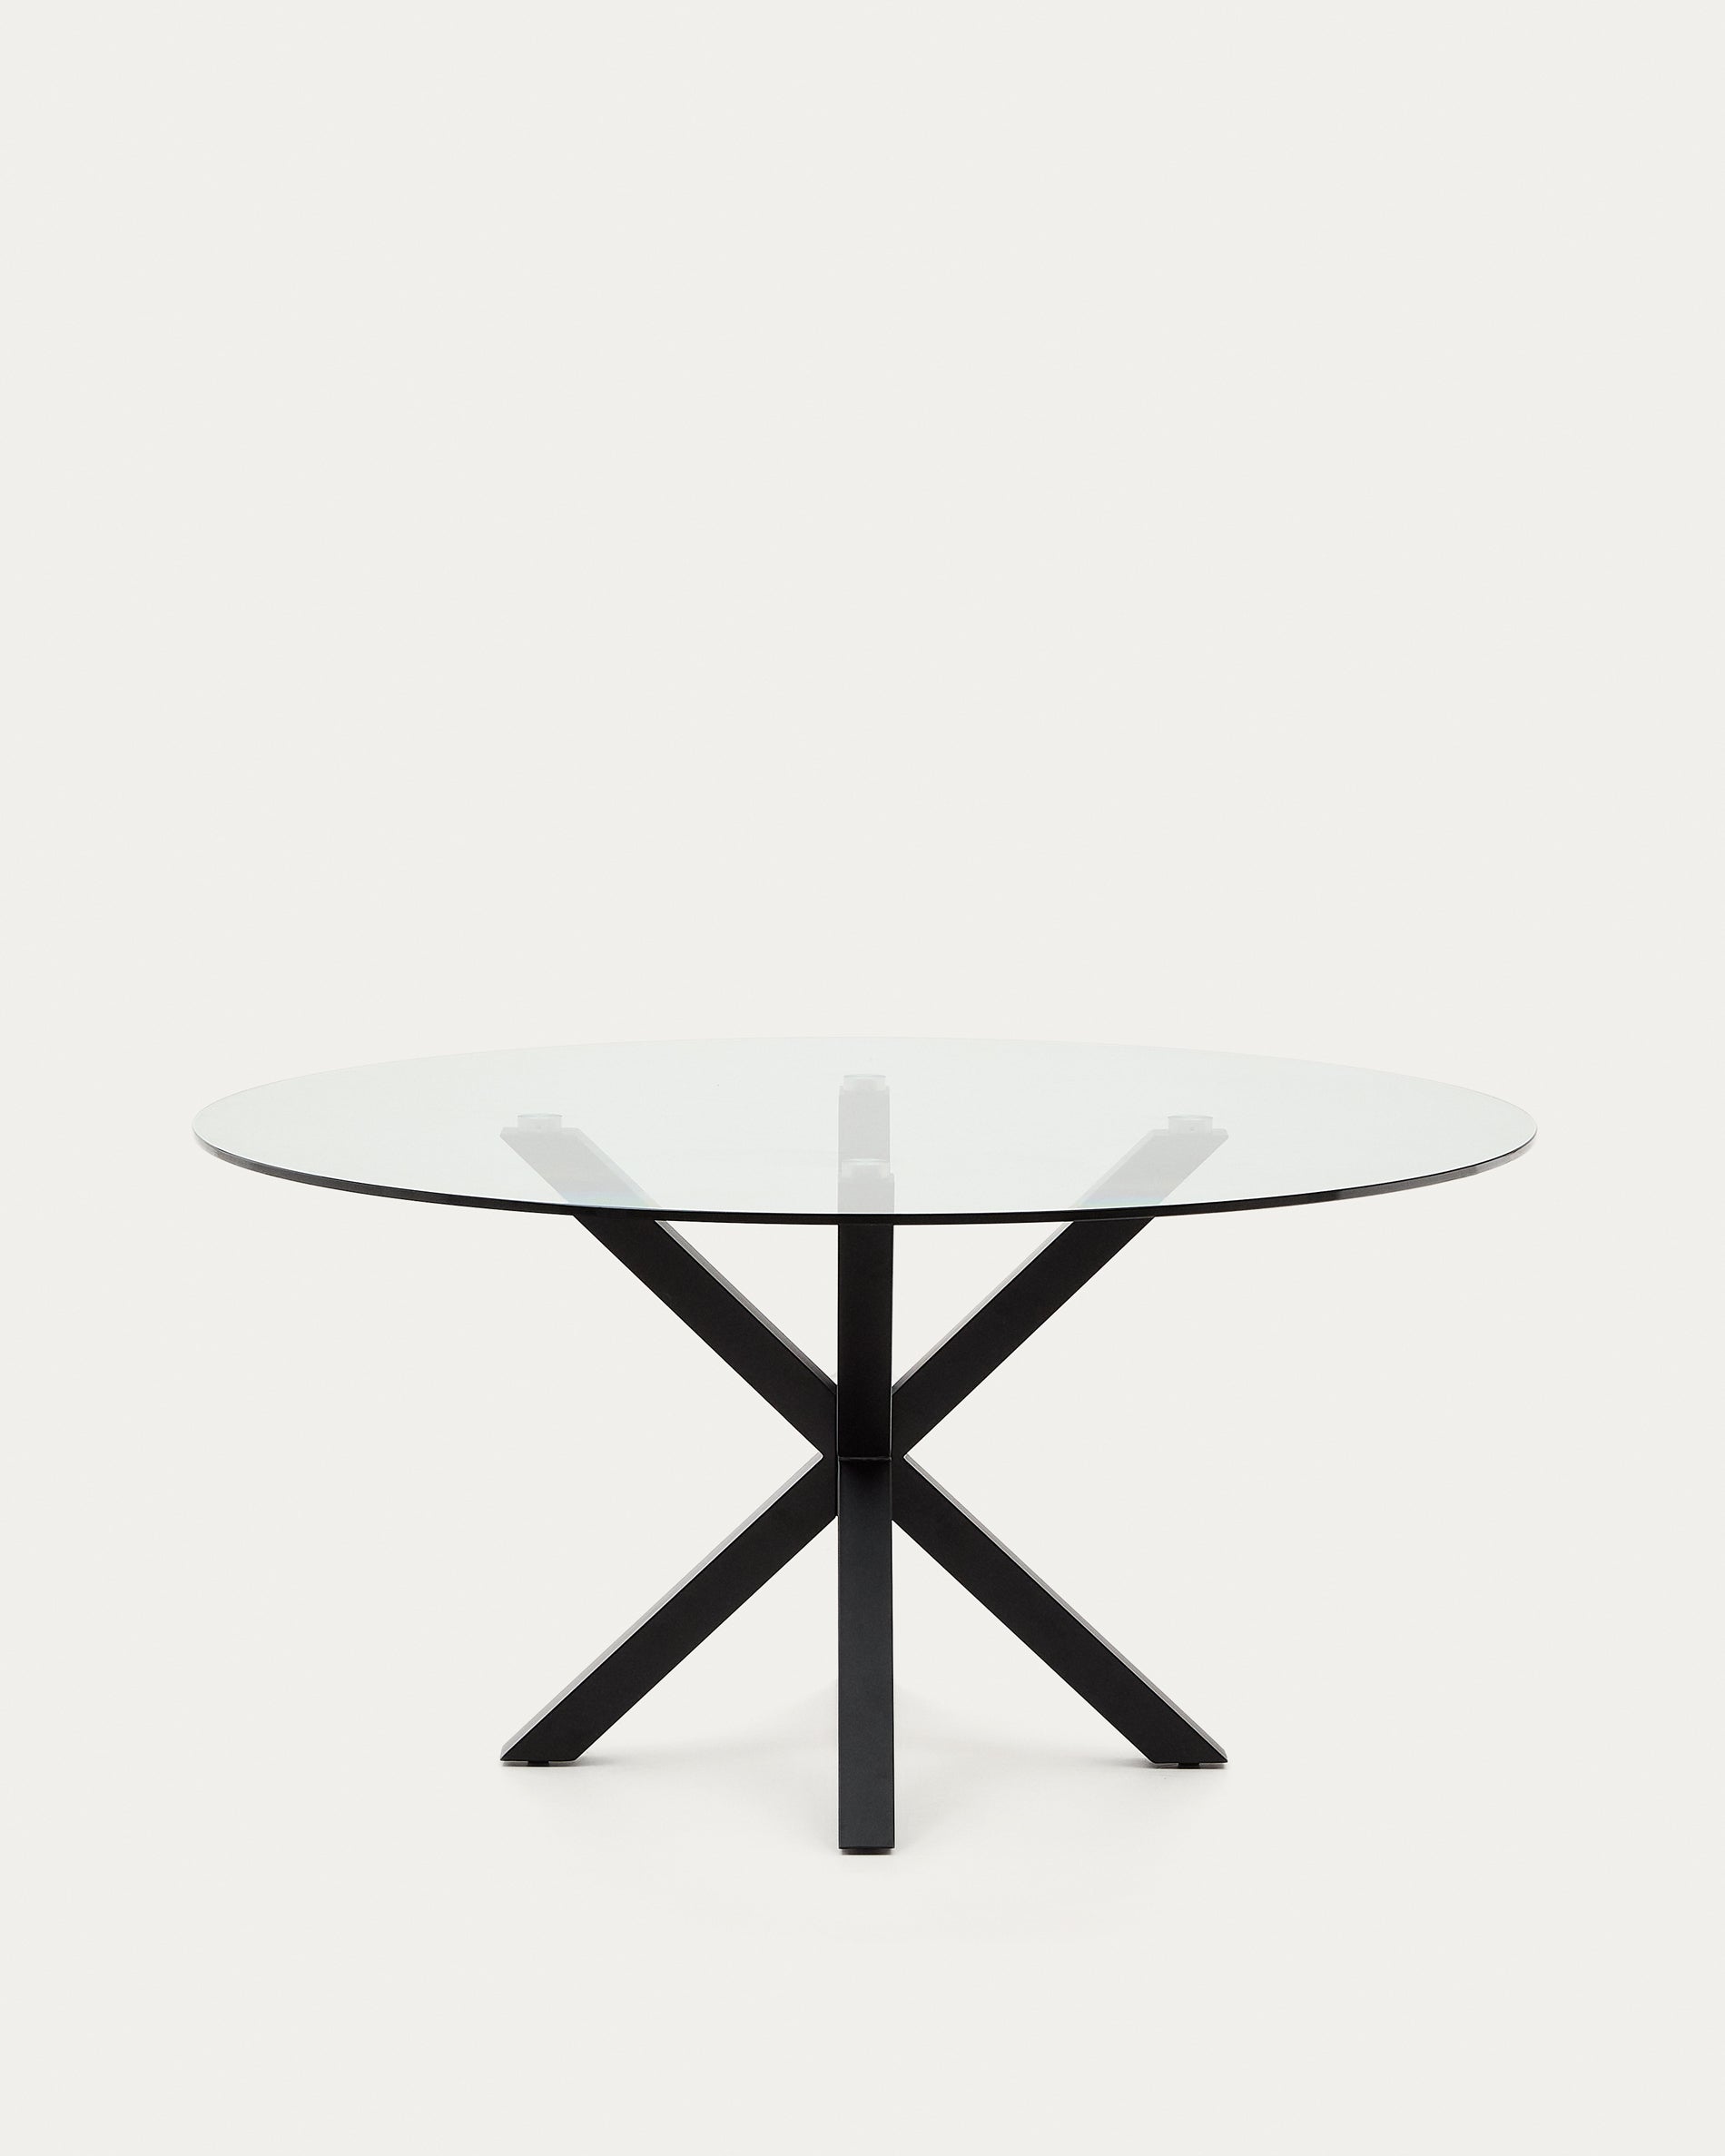 Argo round table with glass and steel legs, black finish Ø 150 cm